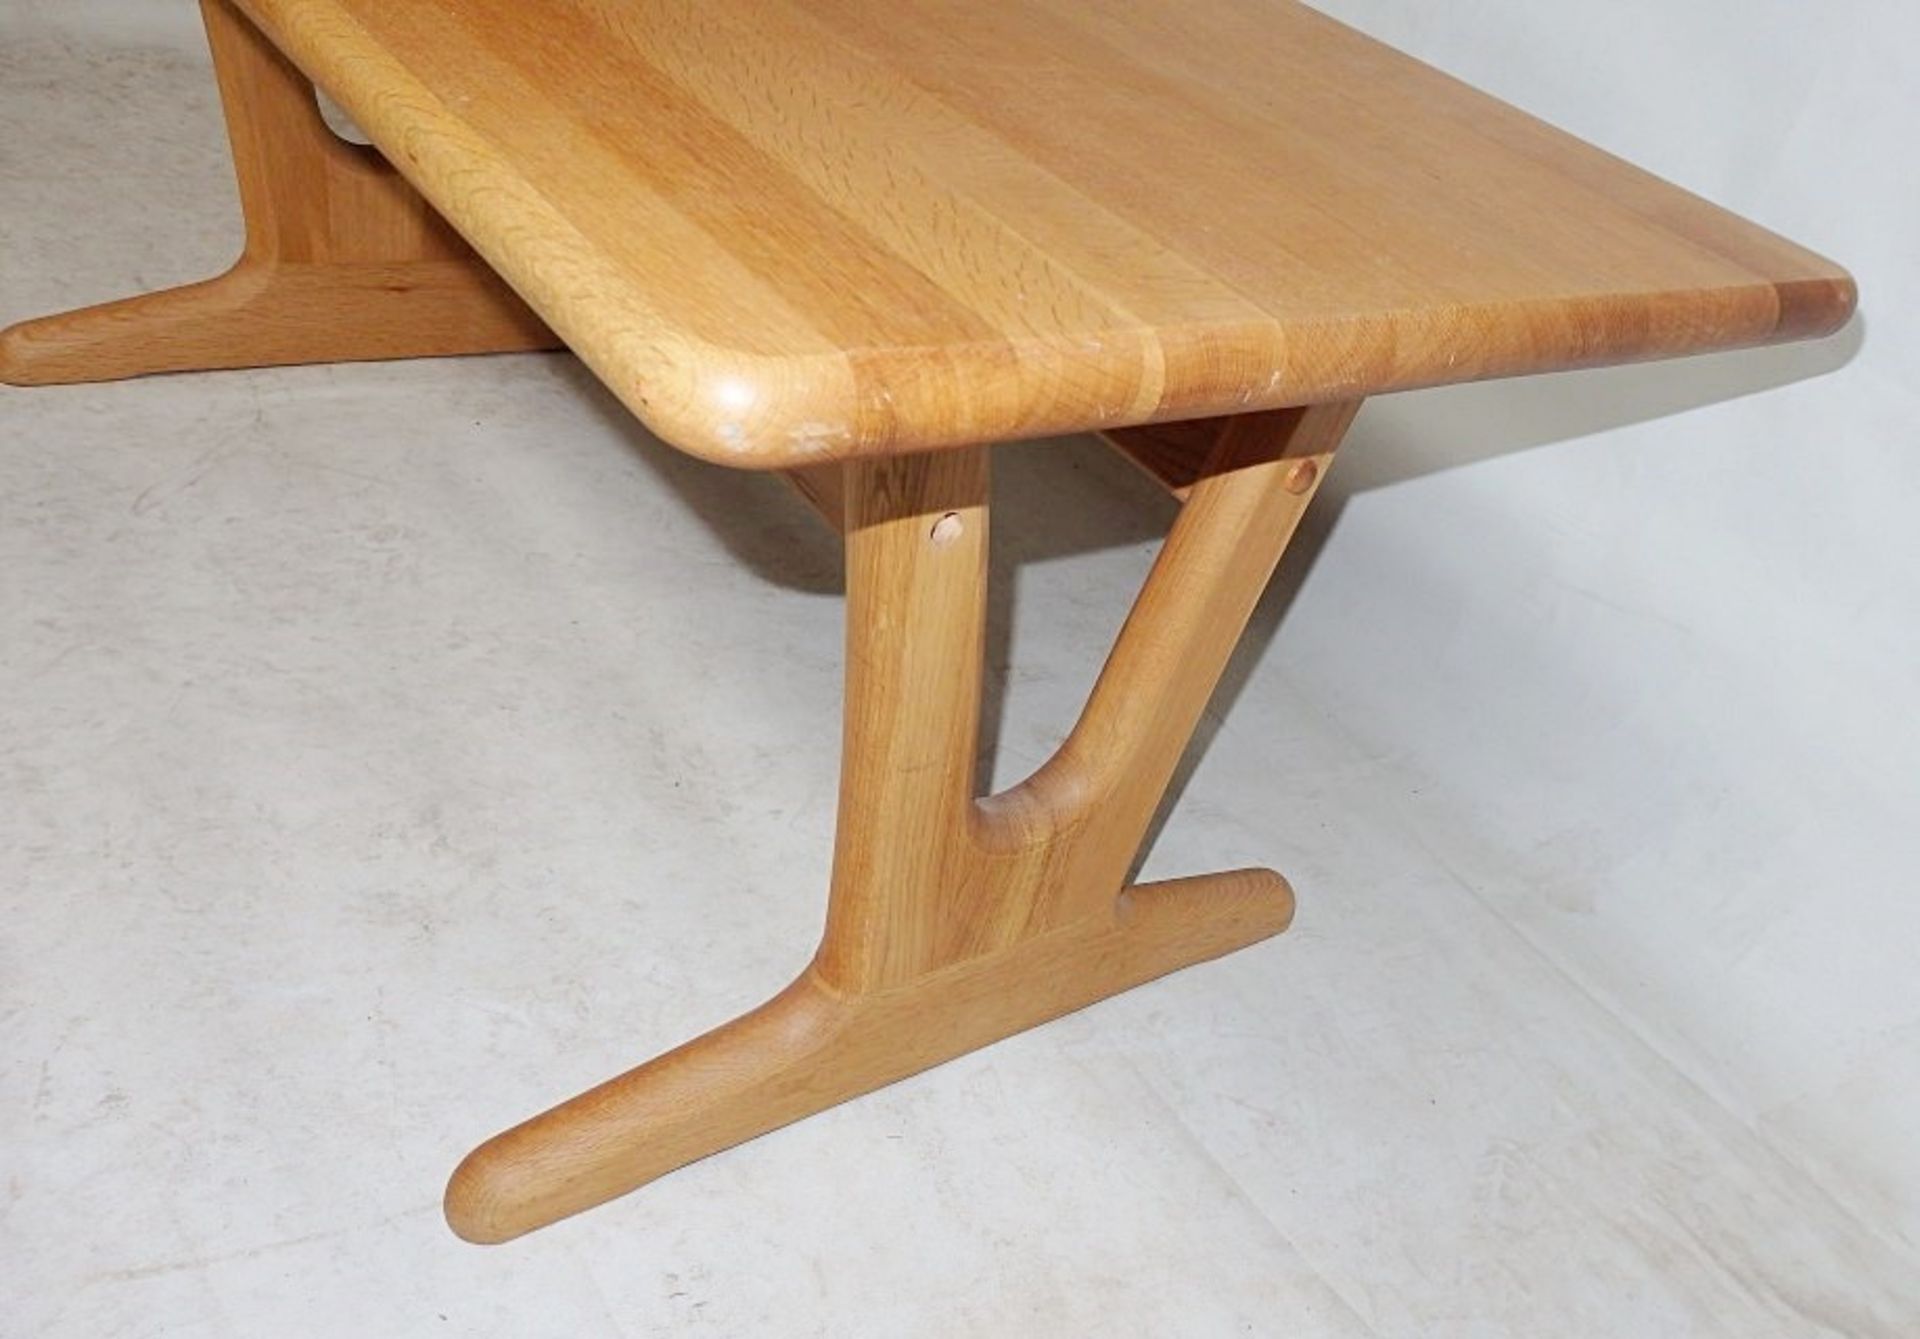 1 x Wooden Table With a Modern Curved Design - Dimensions: W120 x H52 x D60cm - Ref: DB037 - CL122 - - Image 4 of 6